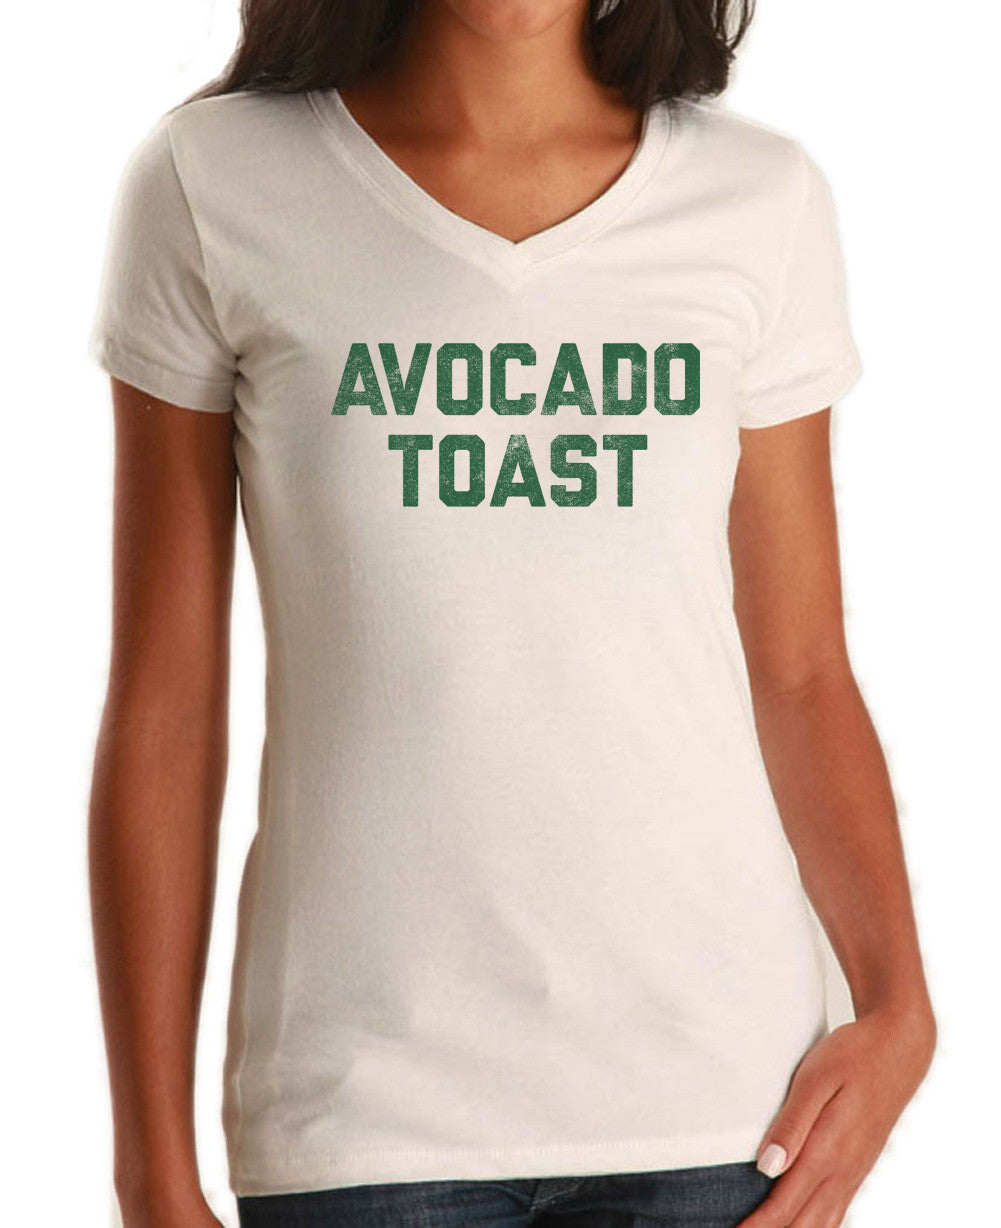 Women's Avocado Toast Vneck T-Shirt Funny Hipster Foodie